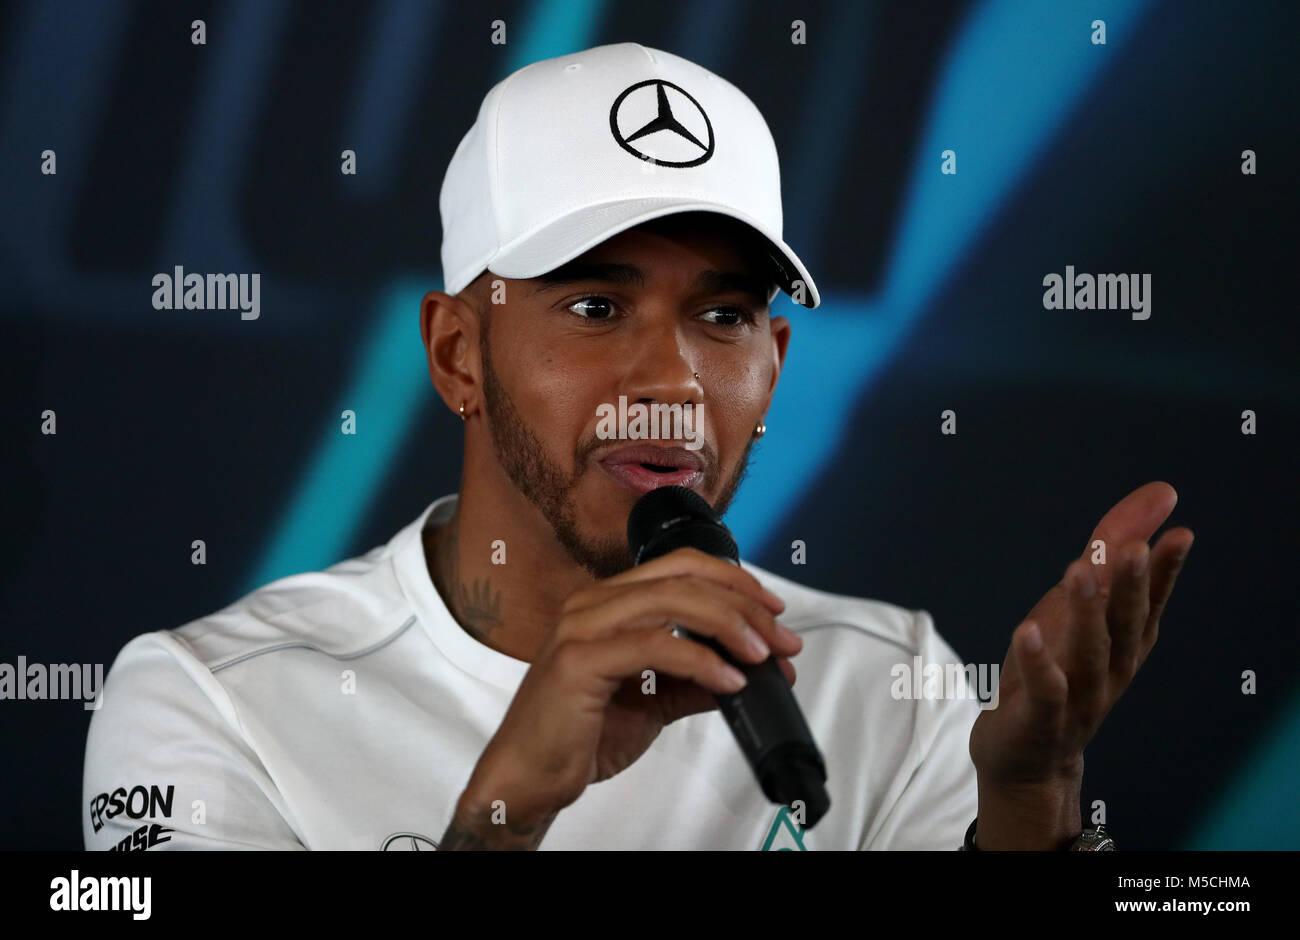 Mercedes driver Lewis Hamilton attending a press conference during the Mercedes-AMG F1 2018 car launch at Silverstone, Towcester. Stock Photo